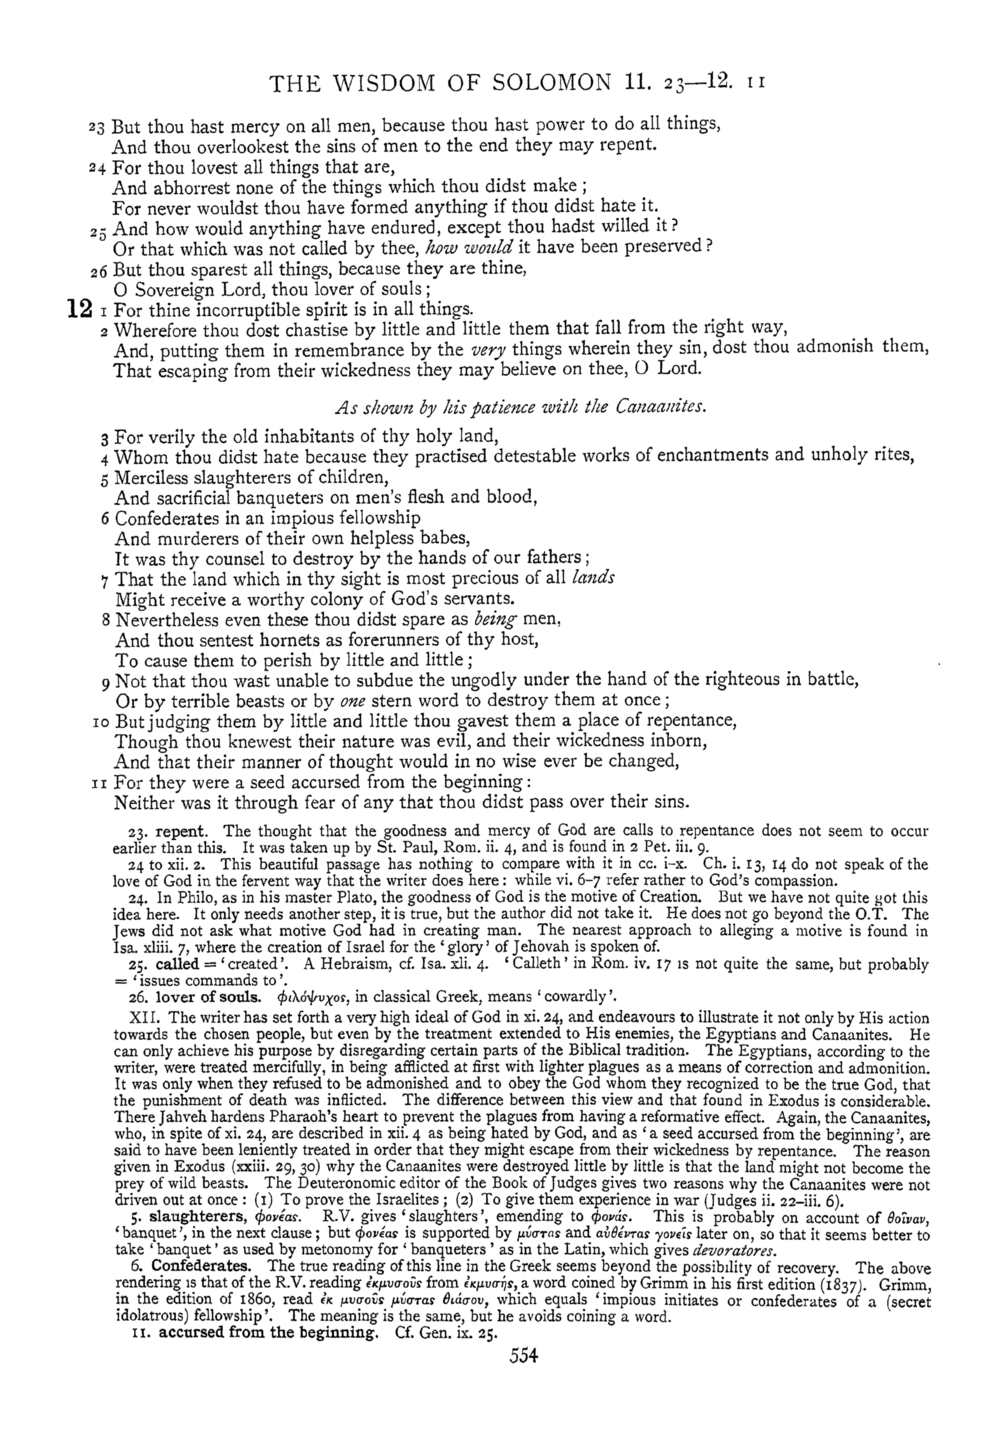 Image of page 554